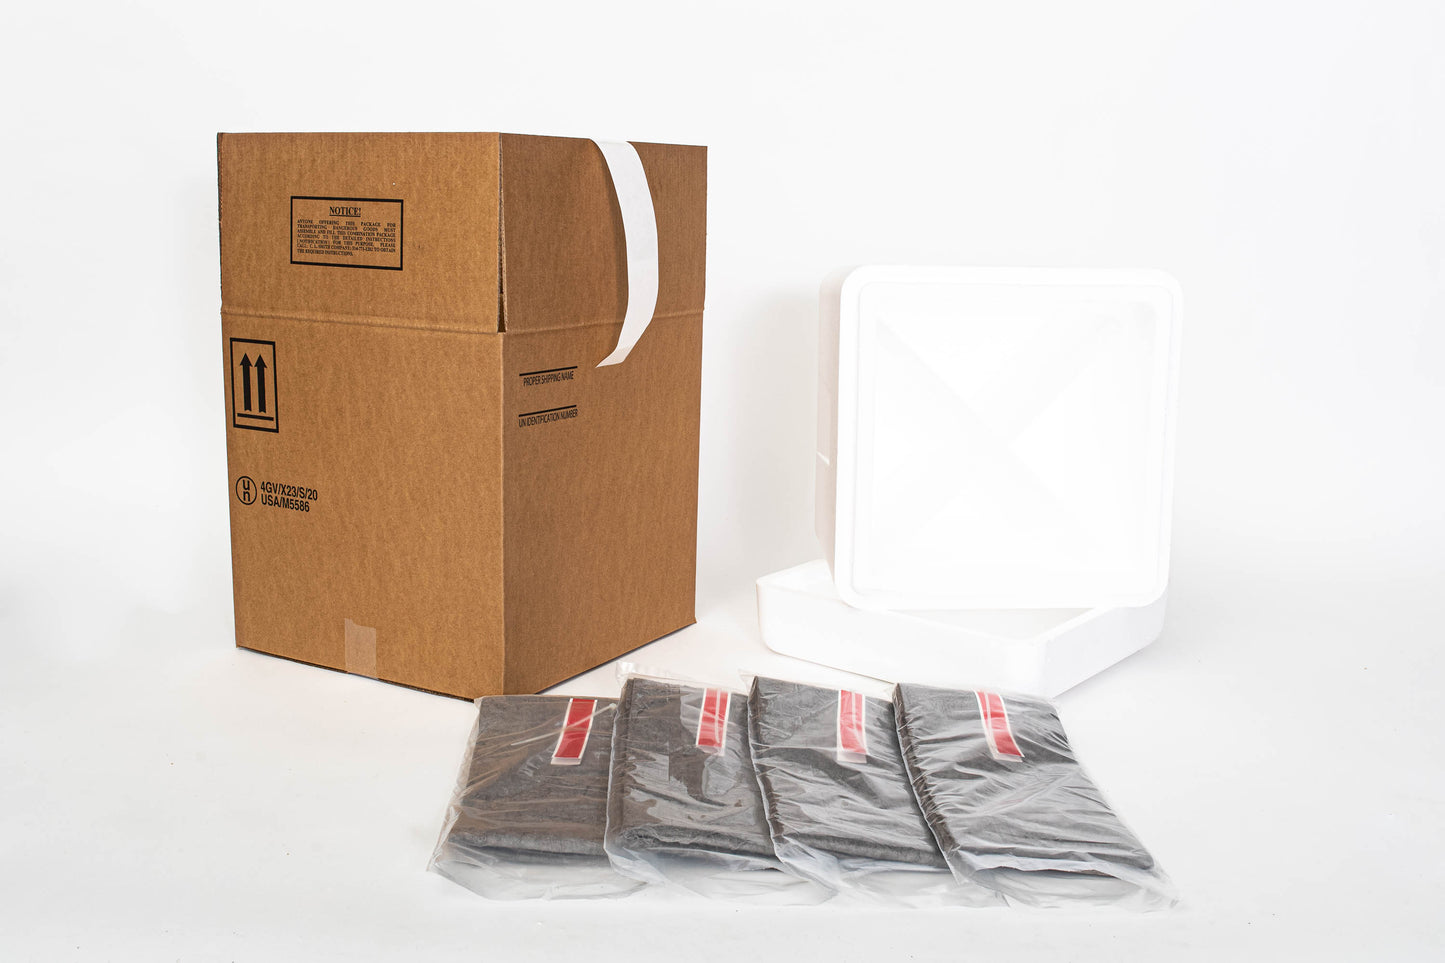 UN4GV 4-in 1 Liter/32oz (or less) Temperature Controlled Absorbent Bag Kit Packaging